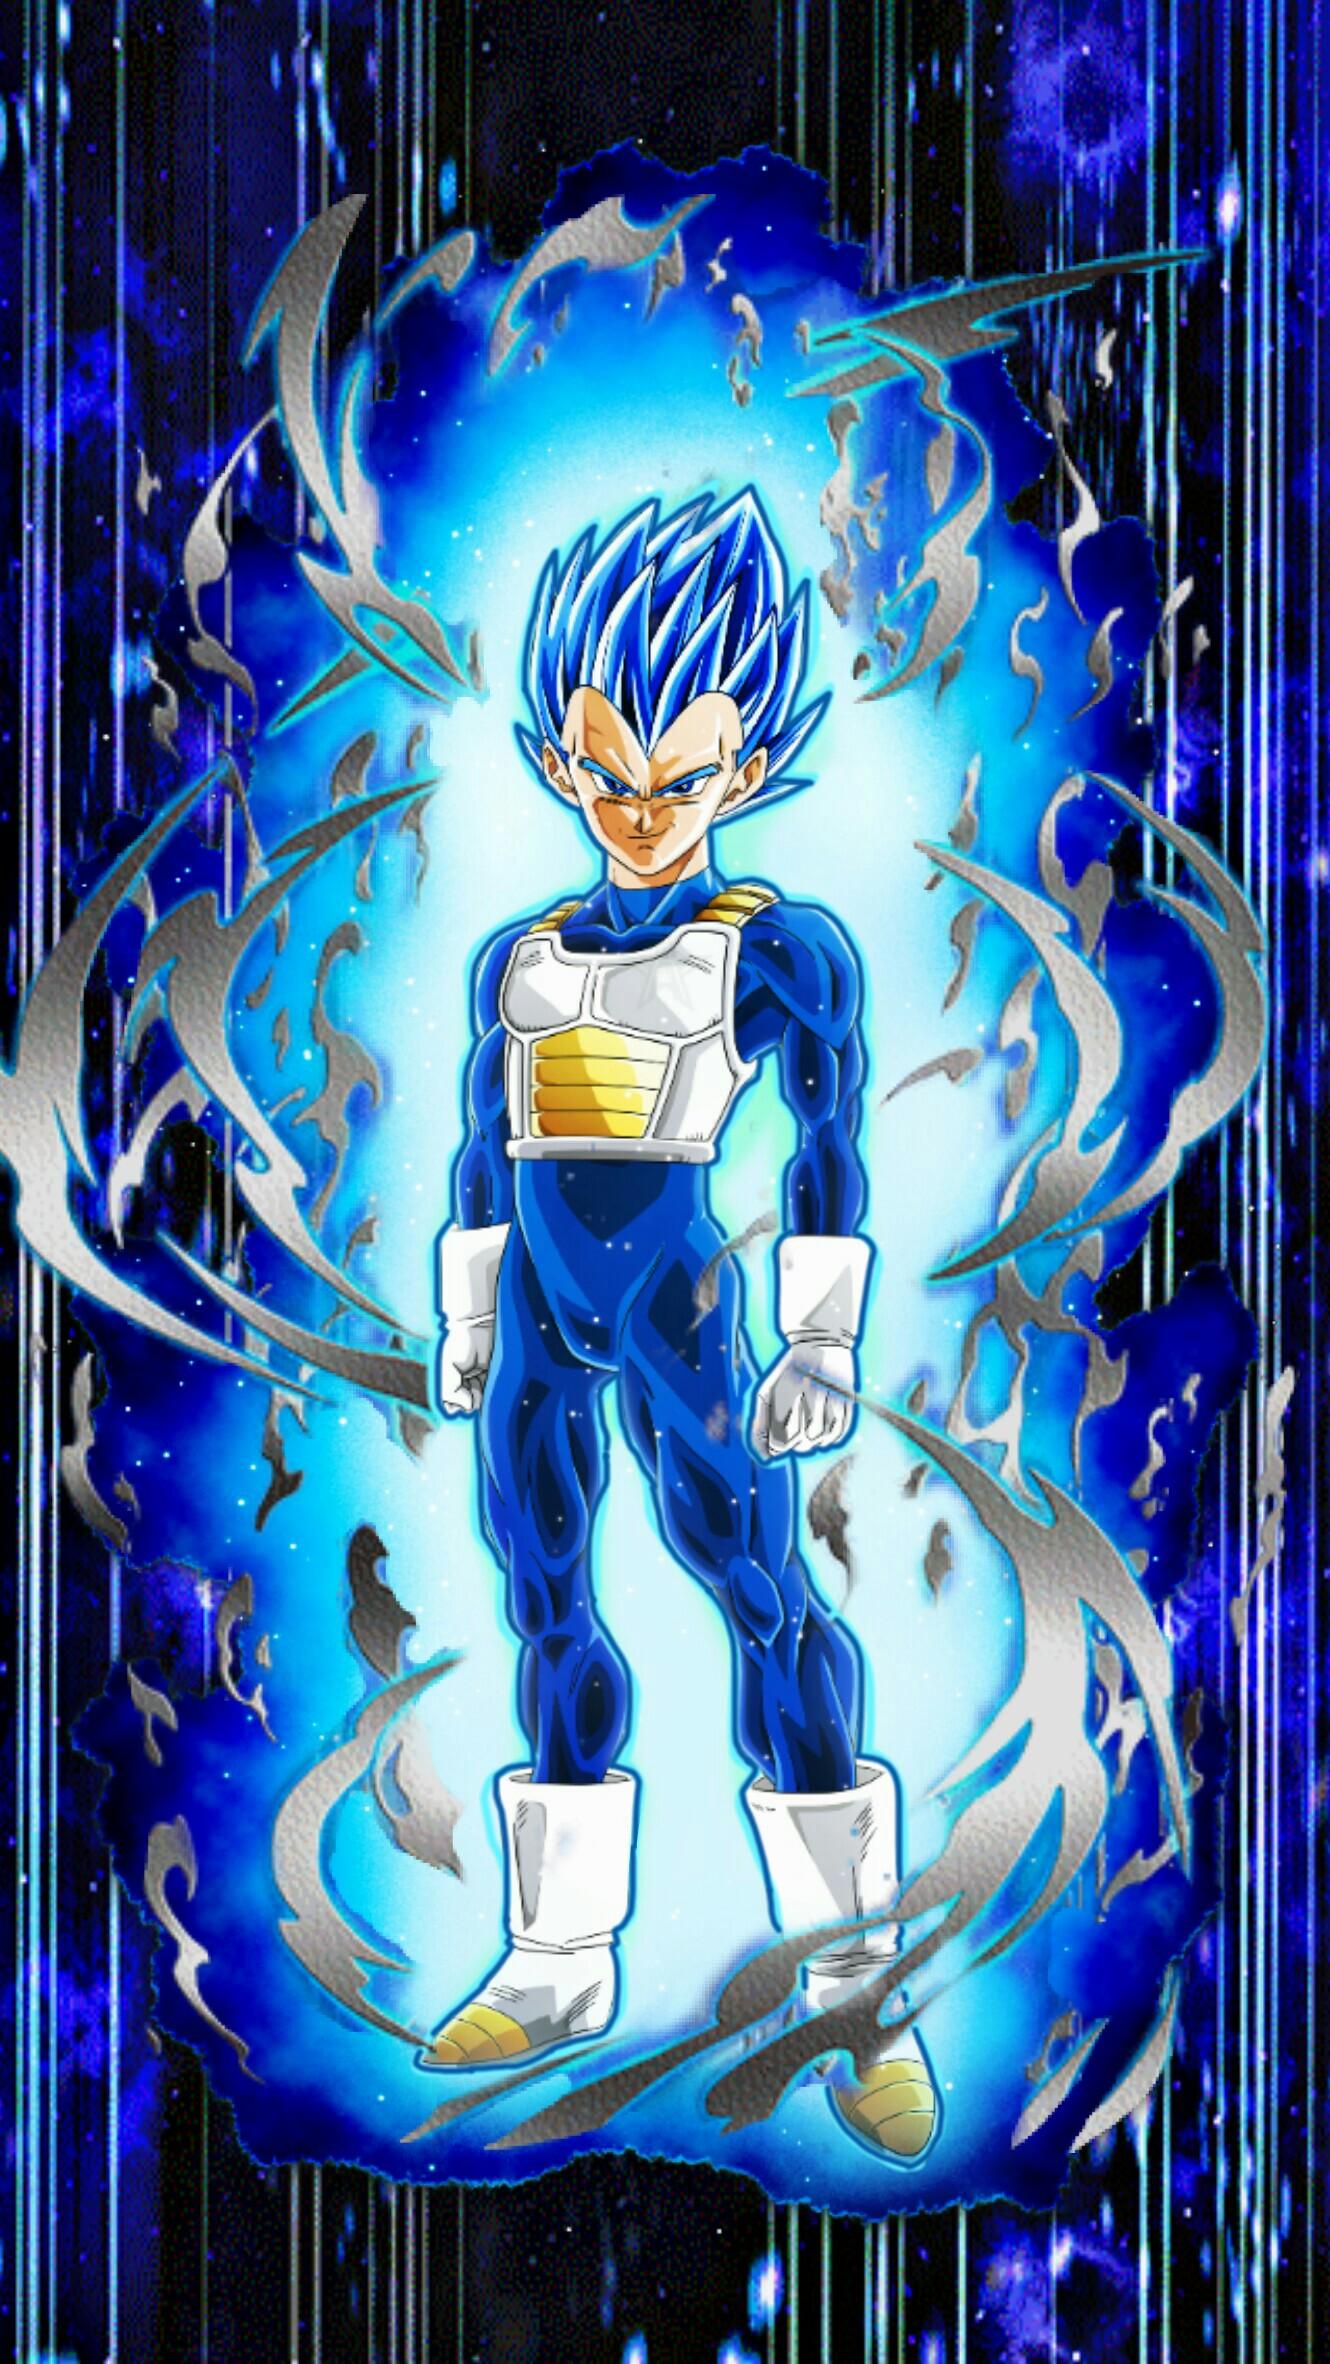 Vegeta Blue Evolution, I'm planning on doing some edits with the new units,  please tell me if you have an idea for a cool edit!✌️ : r/DragonballLegends